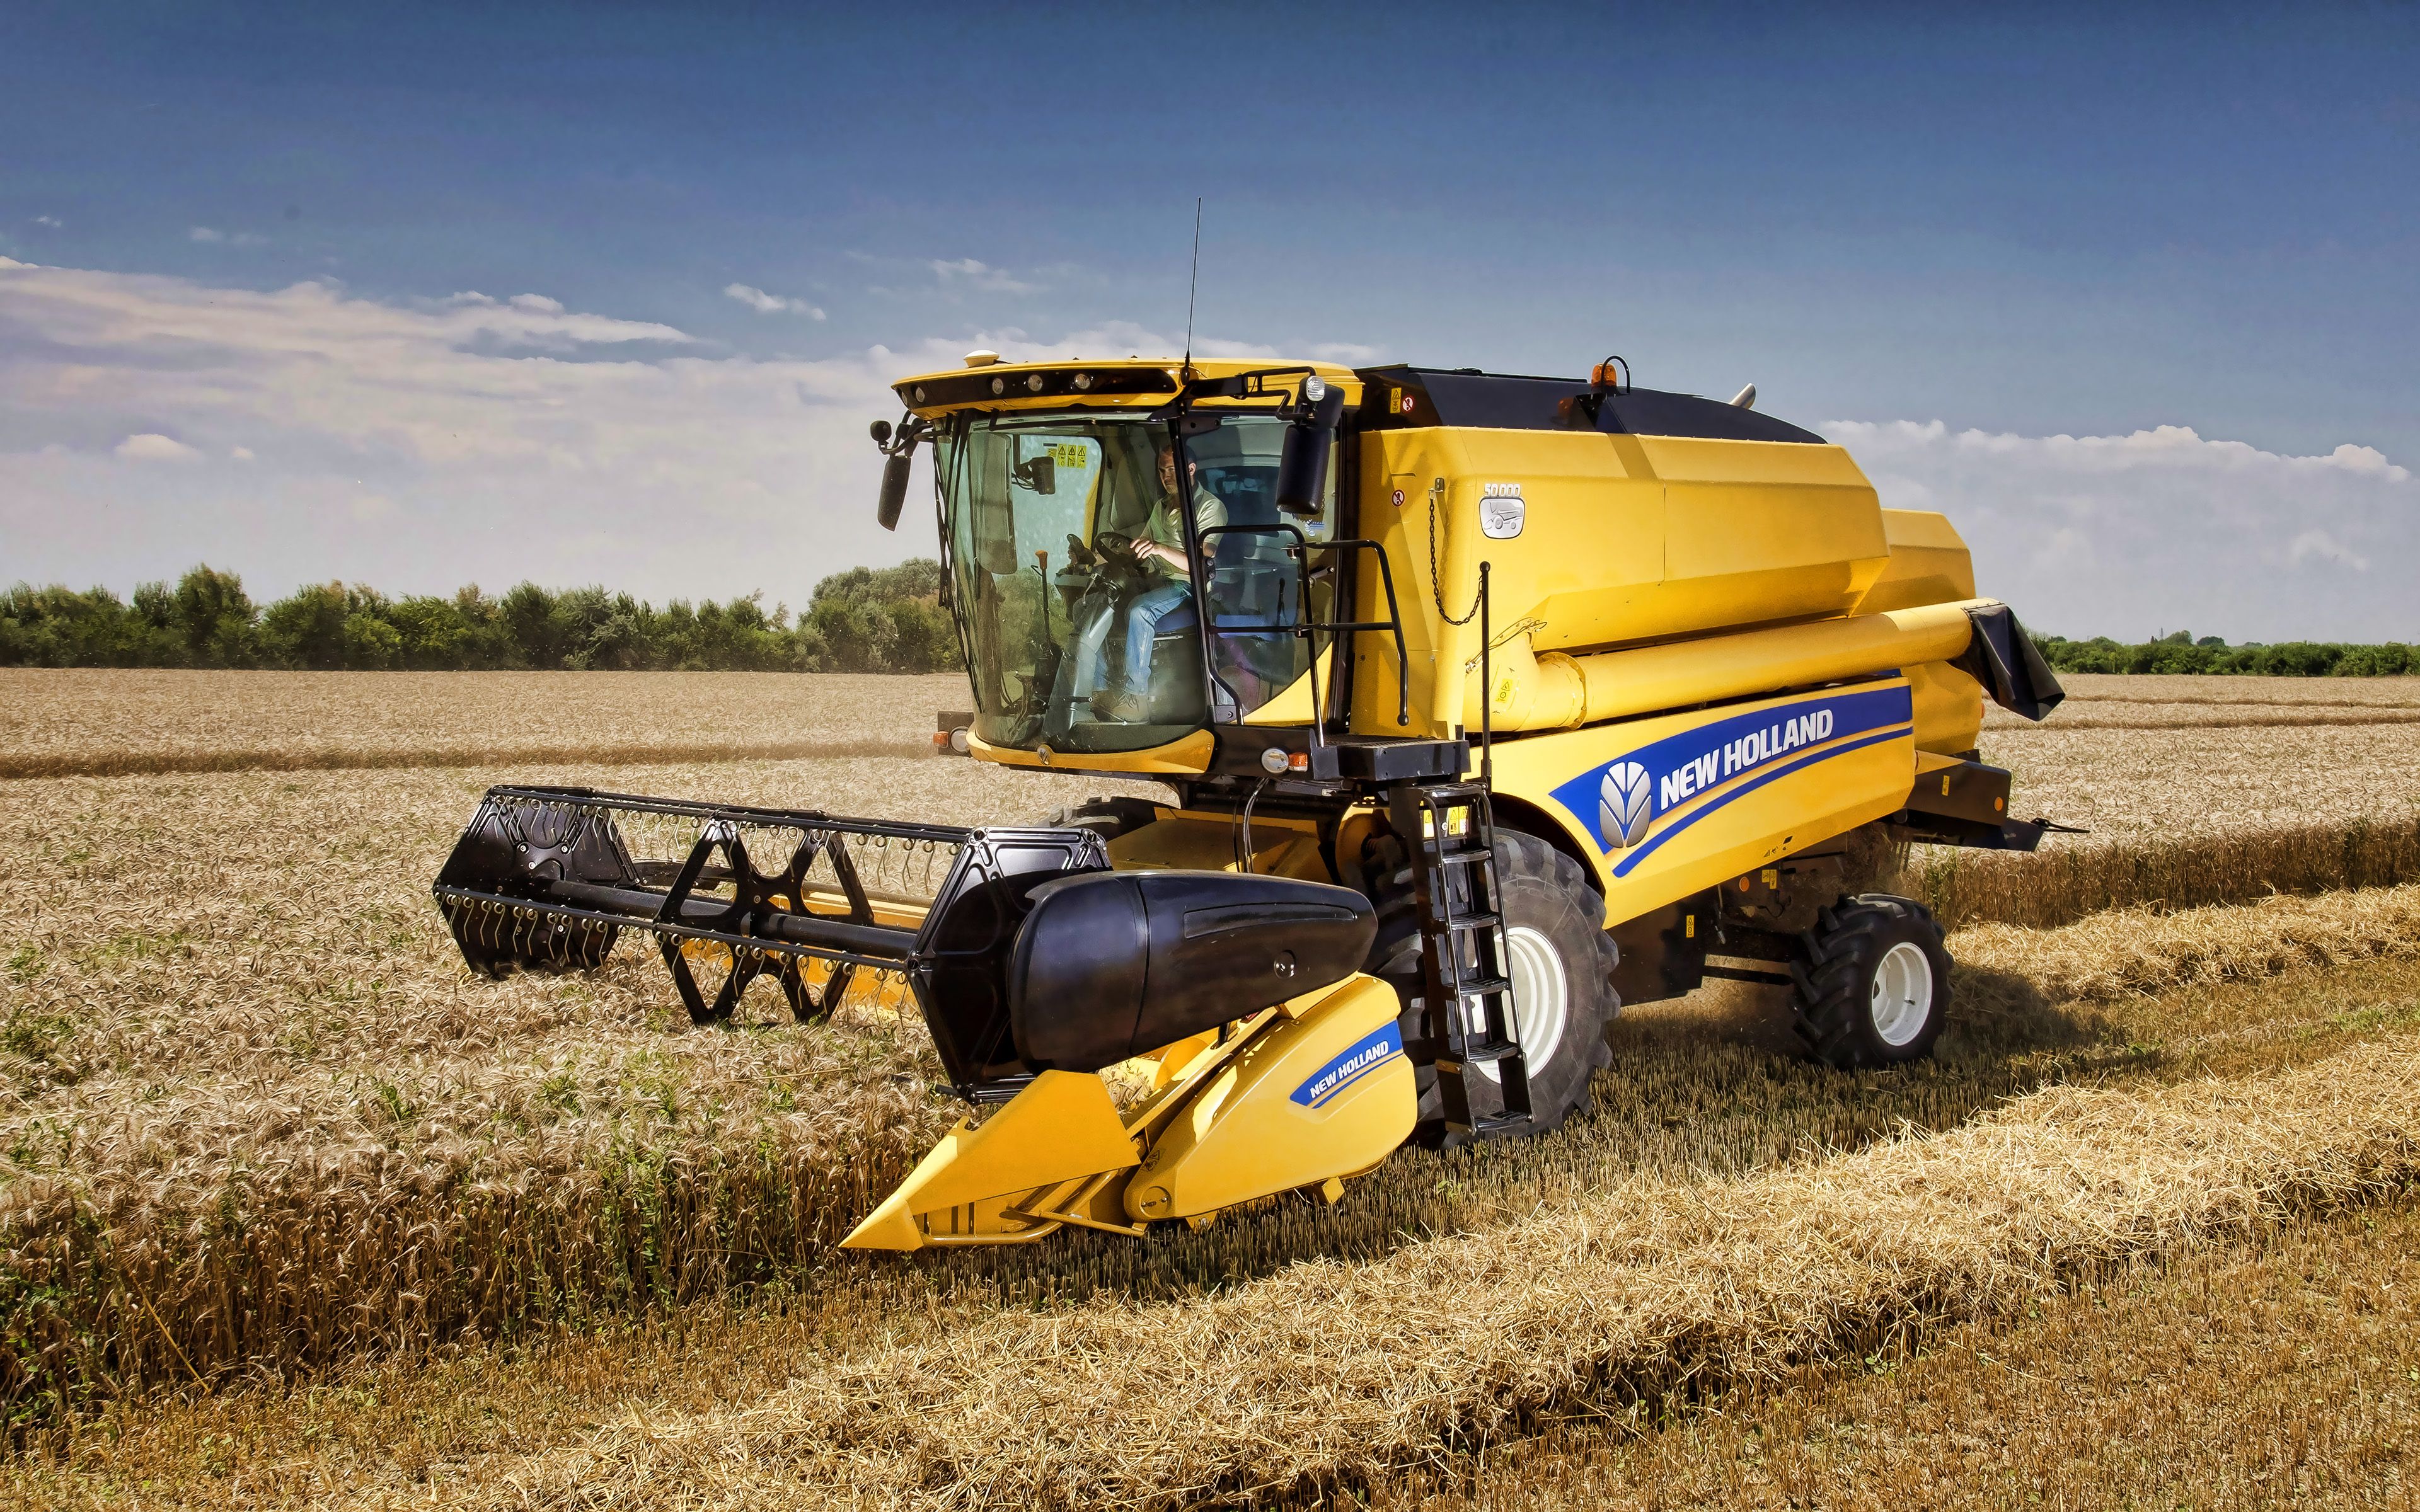 Download wallpaper New Holland TC4- 4k, combine harvester, 2020 combines, wheat harvest, harvesting concepts, New Holland for desktop with resolution 3840x2400. High Quality HD picture wallpaper